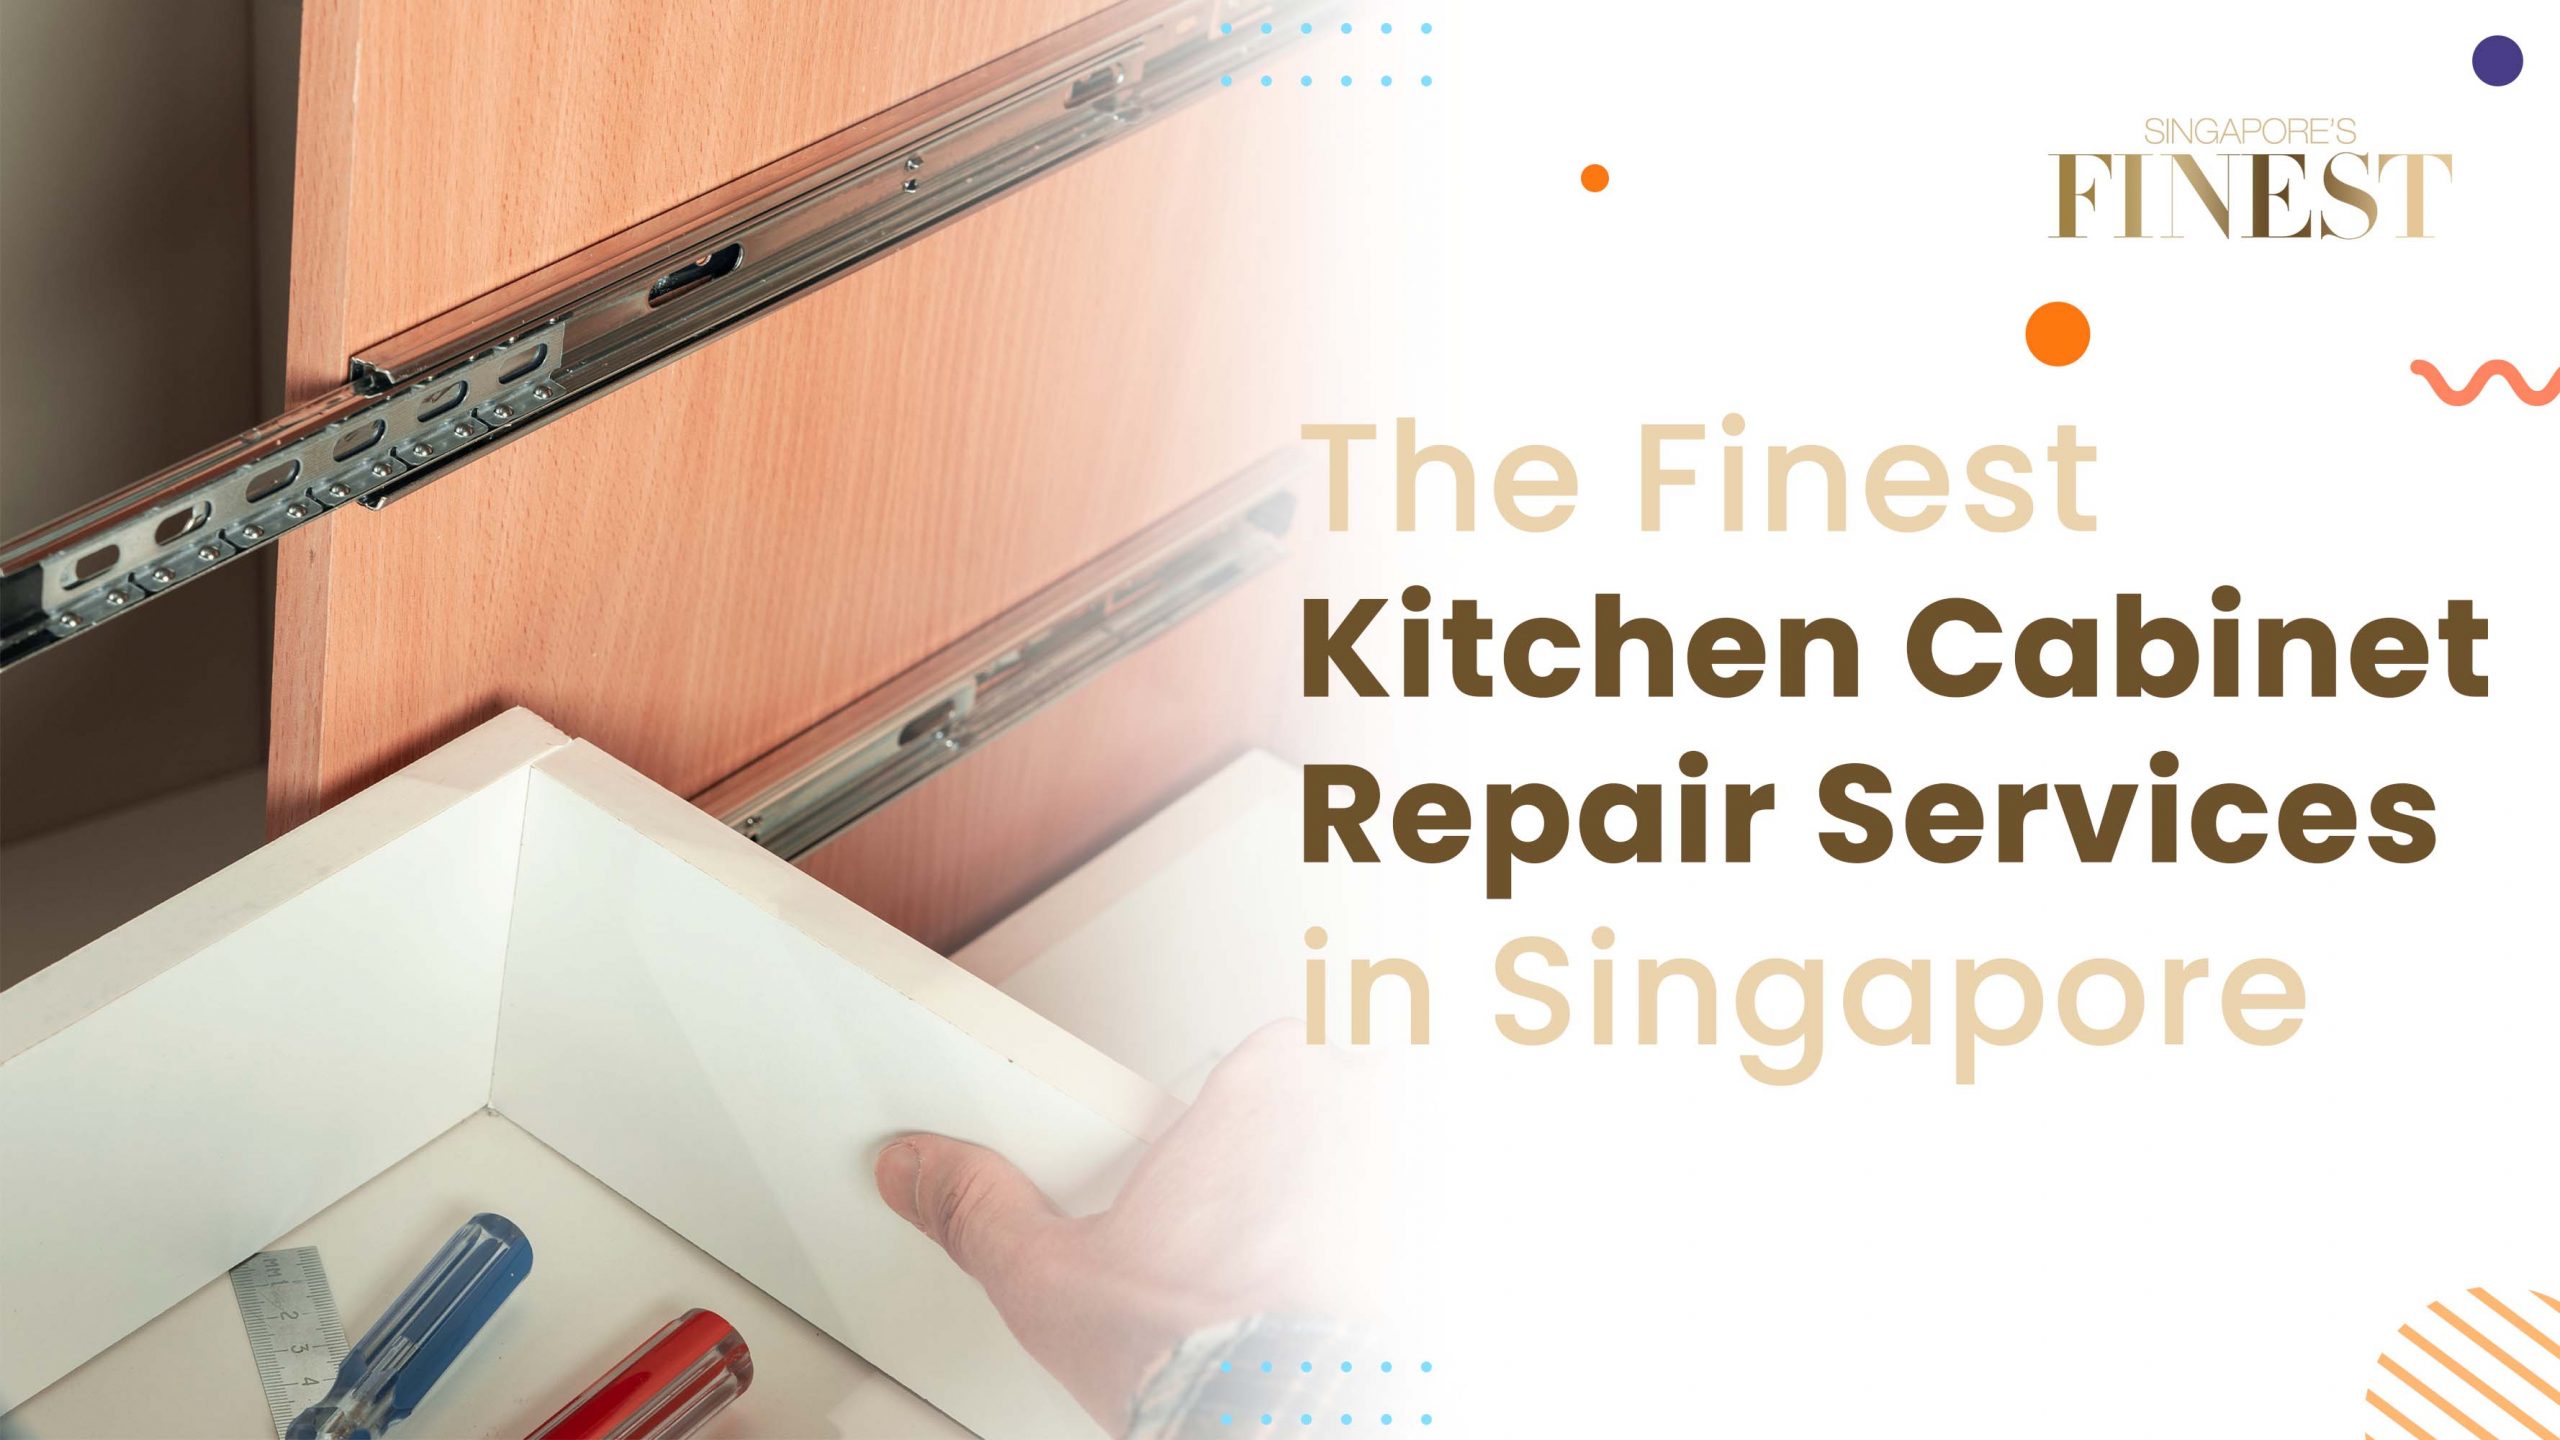 Finest Kitchen Cabinet Repair Services in Singapore